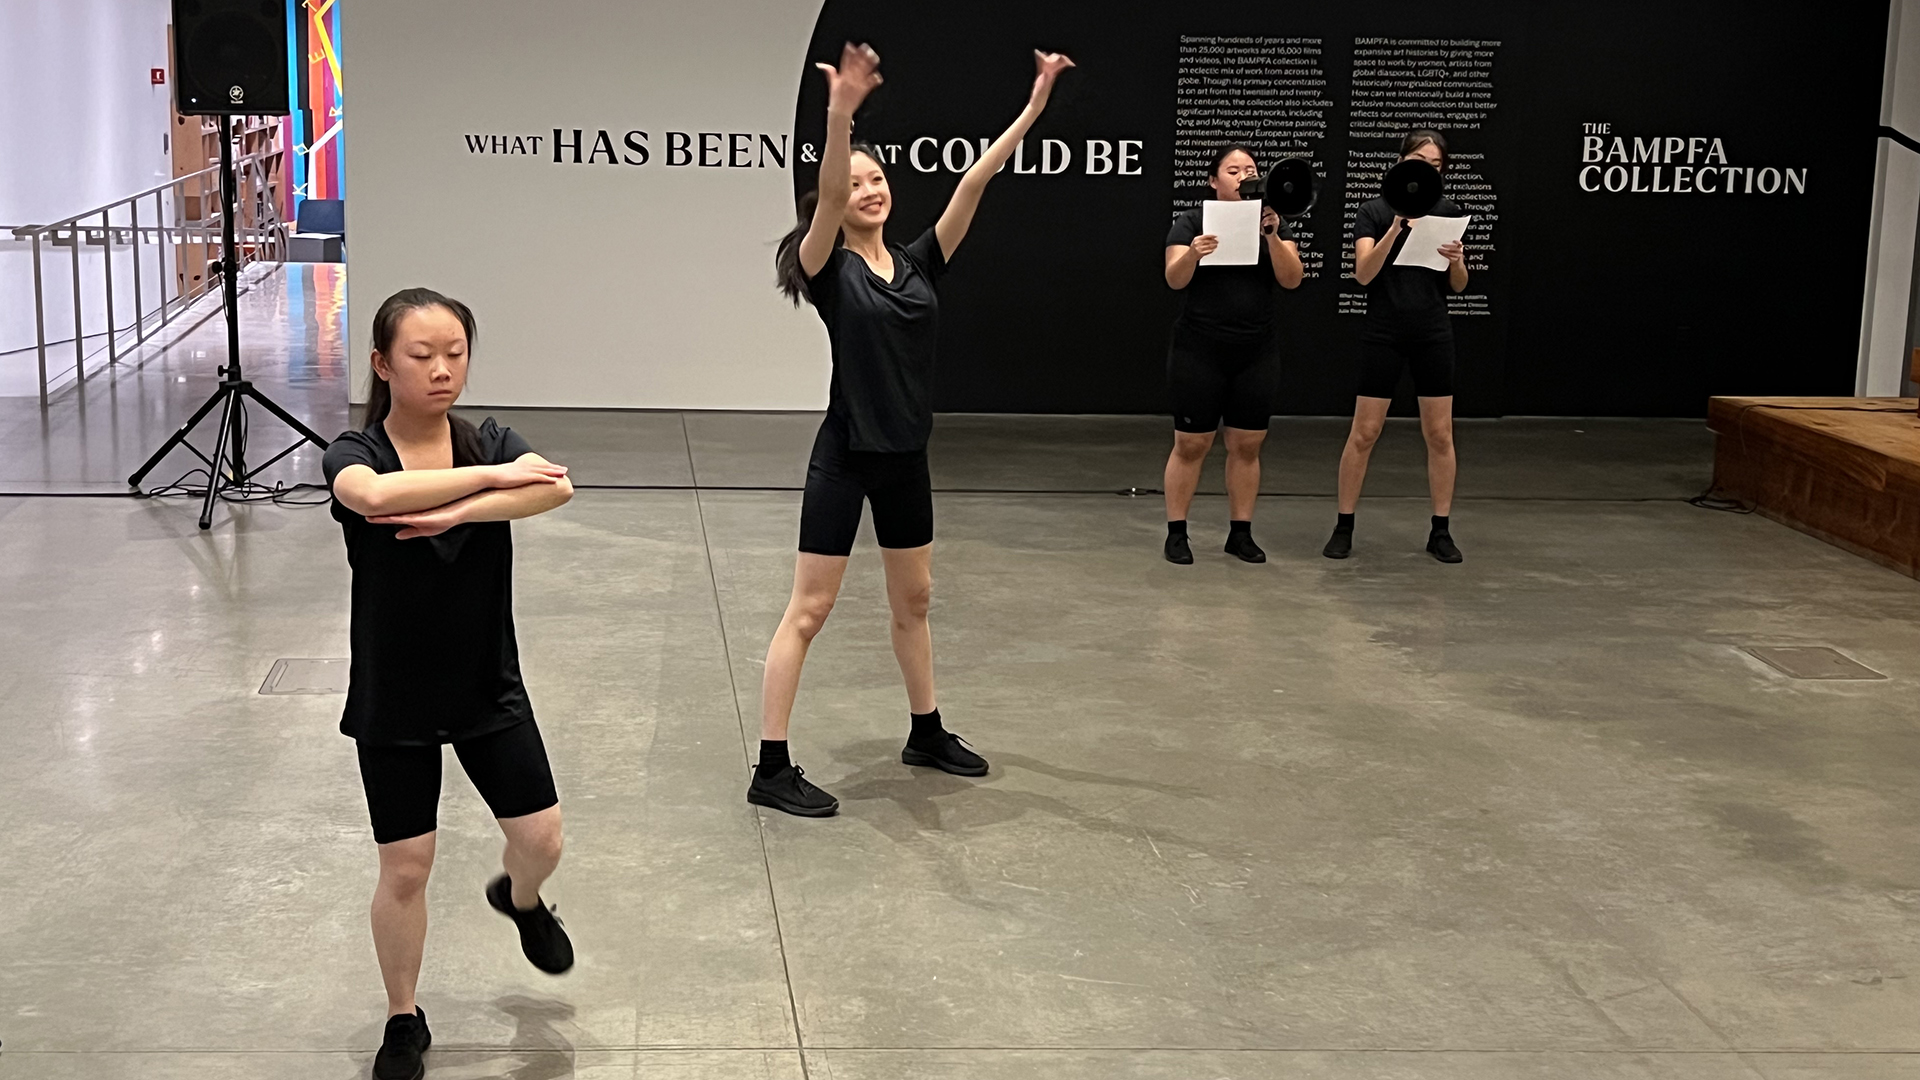 four dancers wearing black shirts, shorts and shoes perform a live dance in a museum gallery